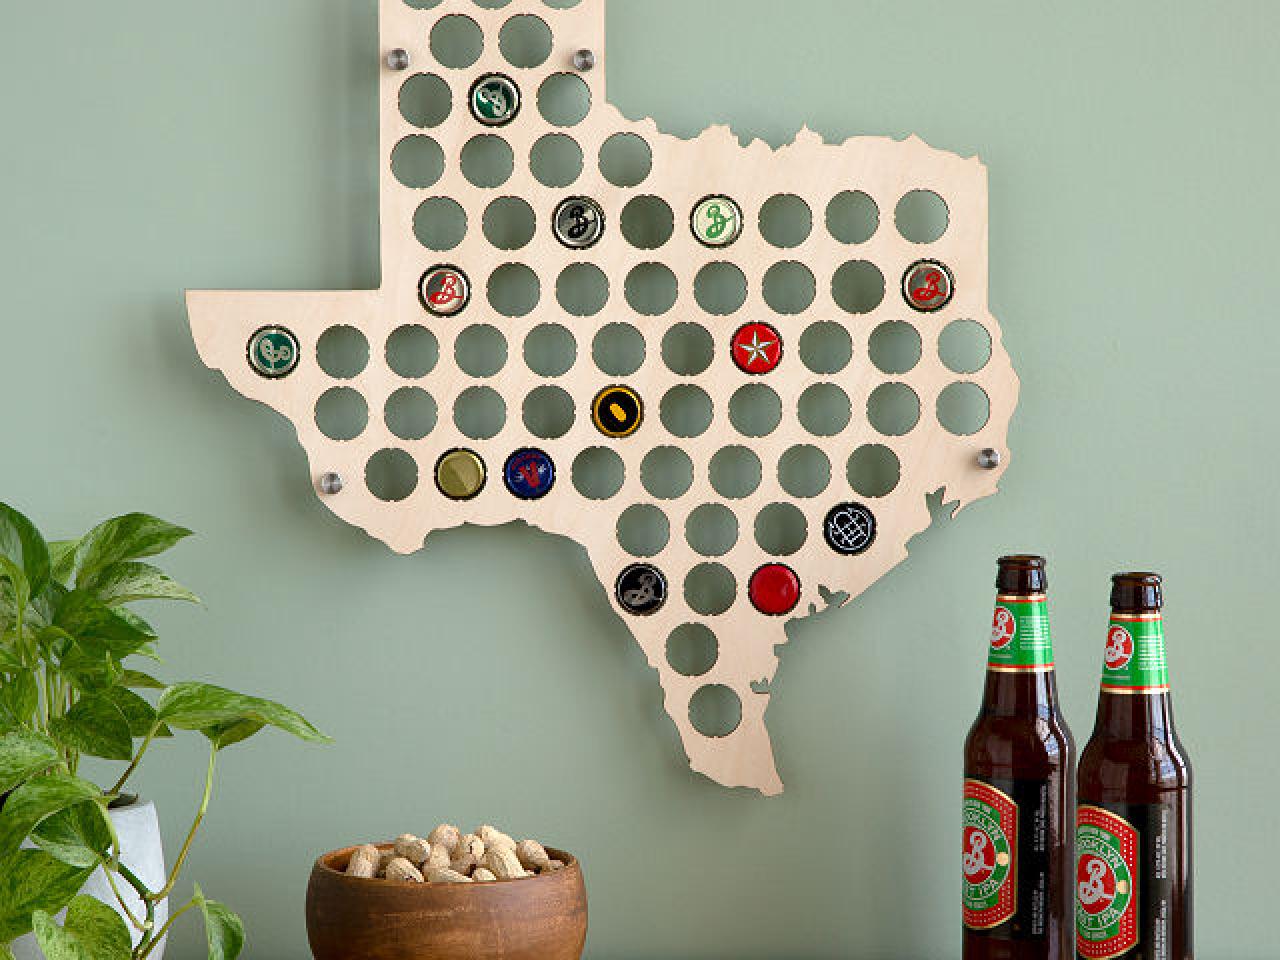 https://hgtvhome.sndimg.com/content/dam/images/hgtv/products/2023/11/28/rx_uncommon-goods_beer-cap-state-map.jpeg.rend.hgtvcom.1280.960.suffix/1701186993924.jpeg